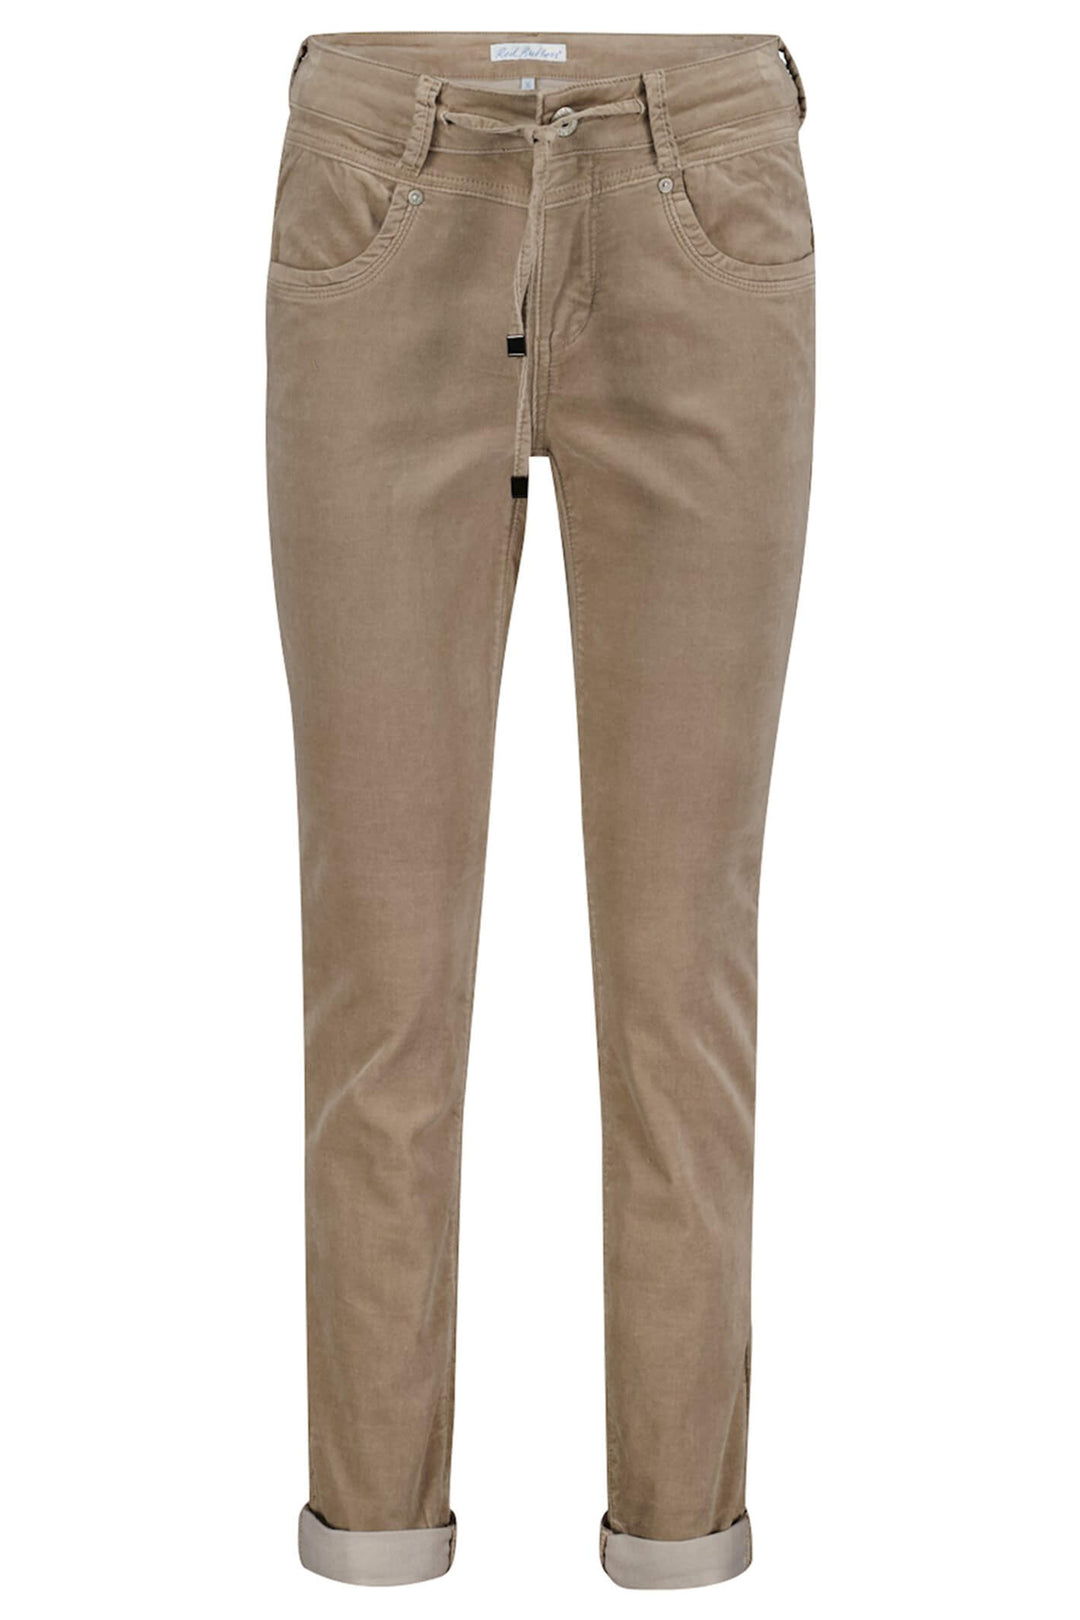 Red Button SRB3907 Relax Taupe Velvet Trousers - Olivia Grace Fashion